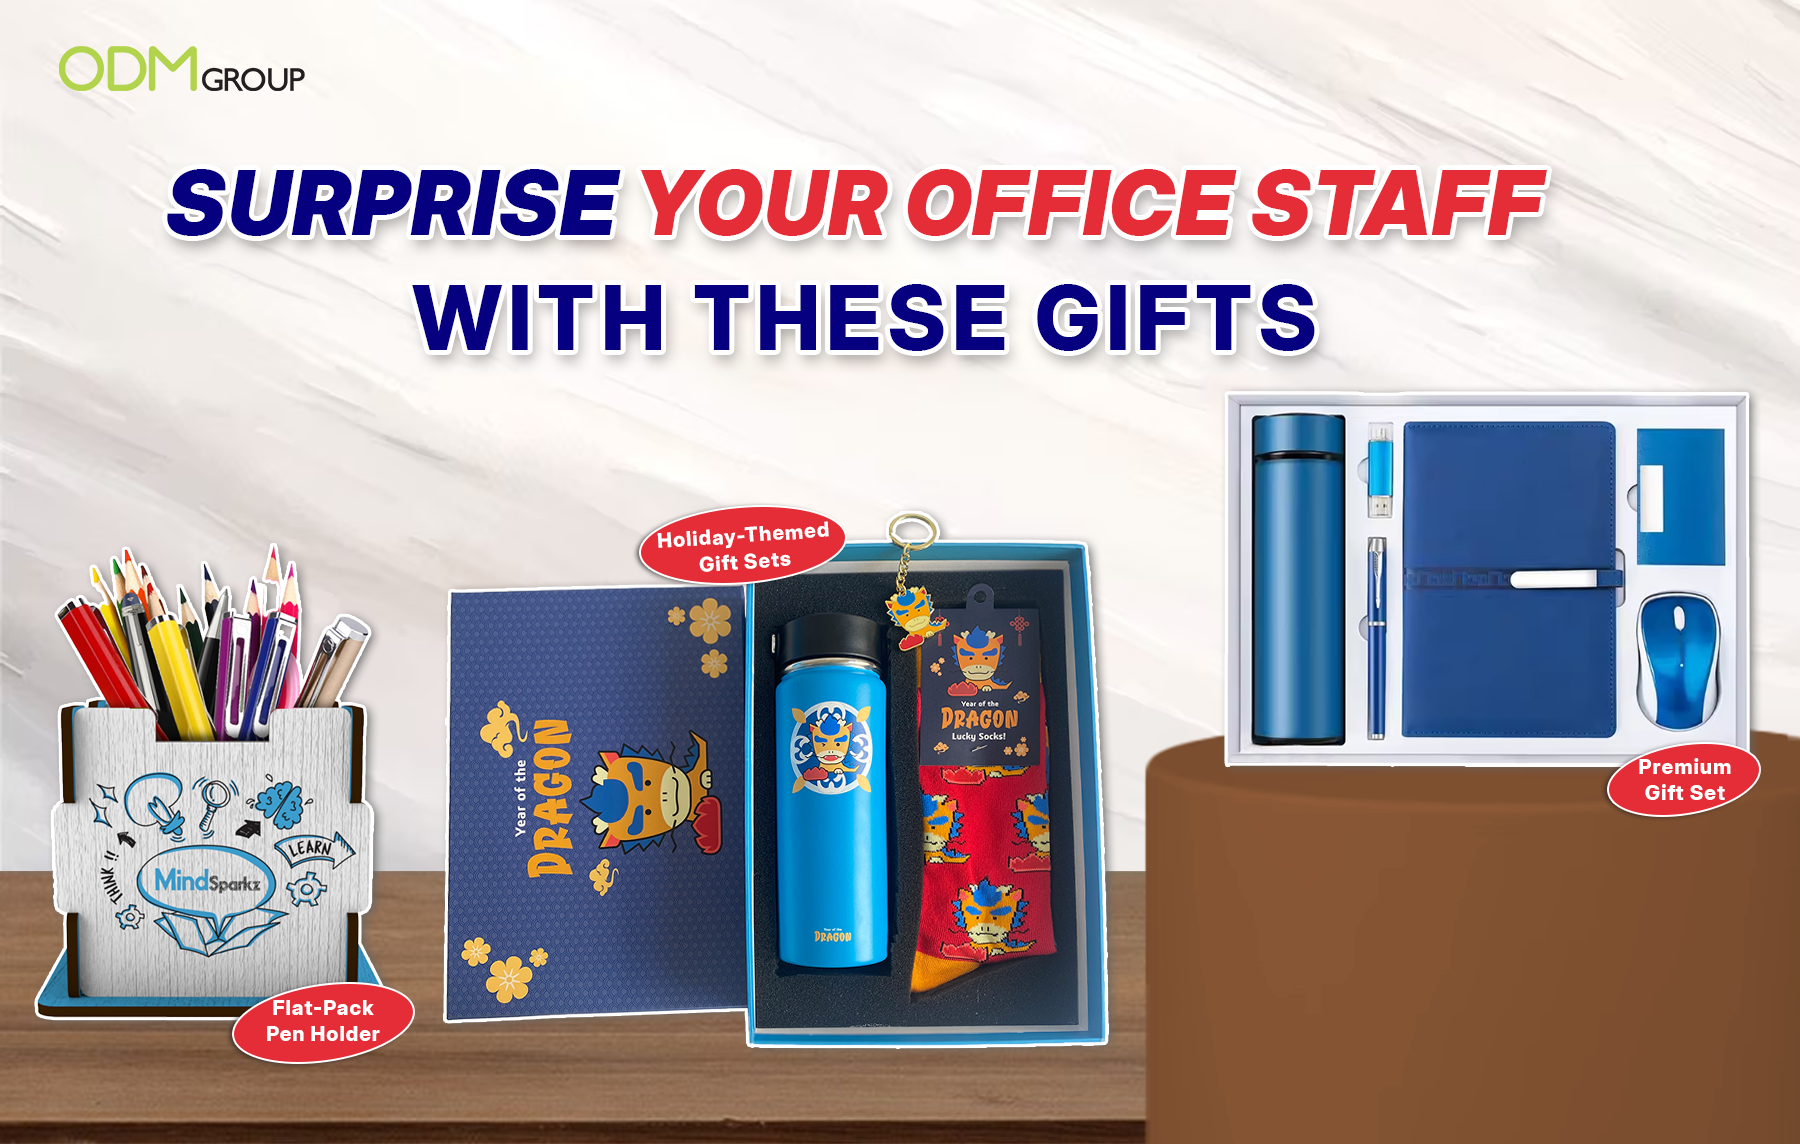 Wellness tips for employees - surprise gifts for office staff.